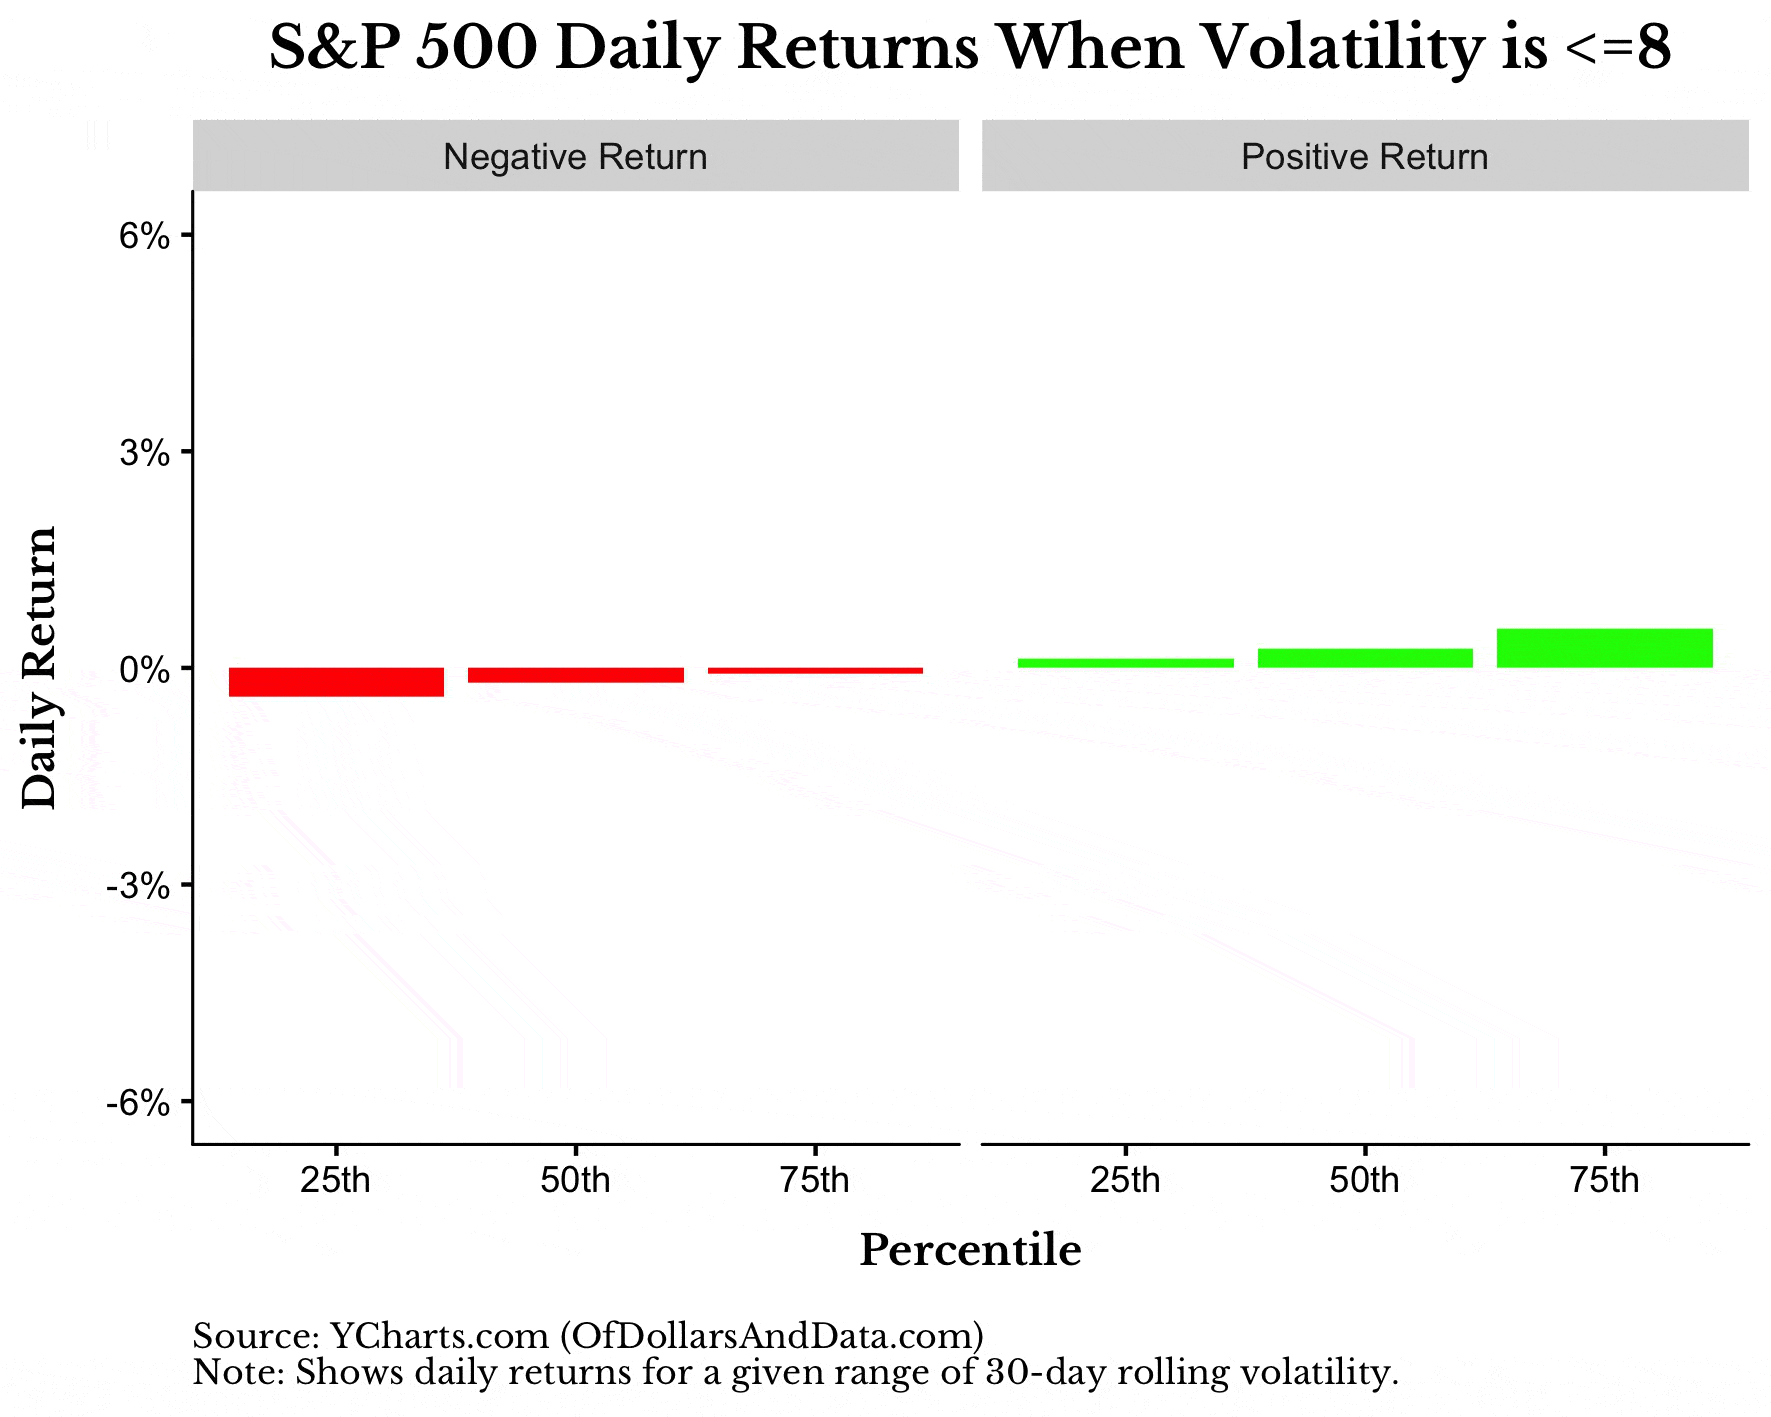 GIF of S&P daily returns across different volatility ranges.